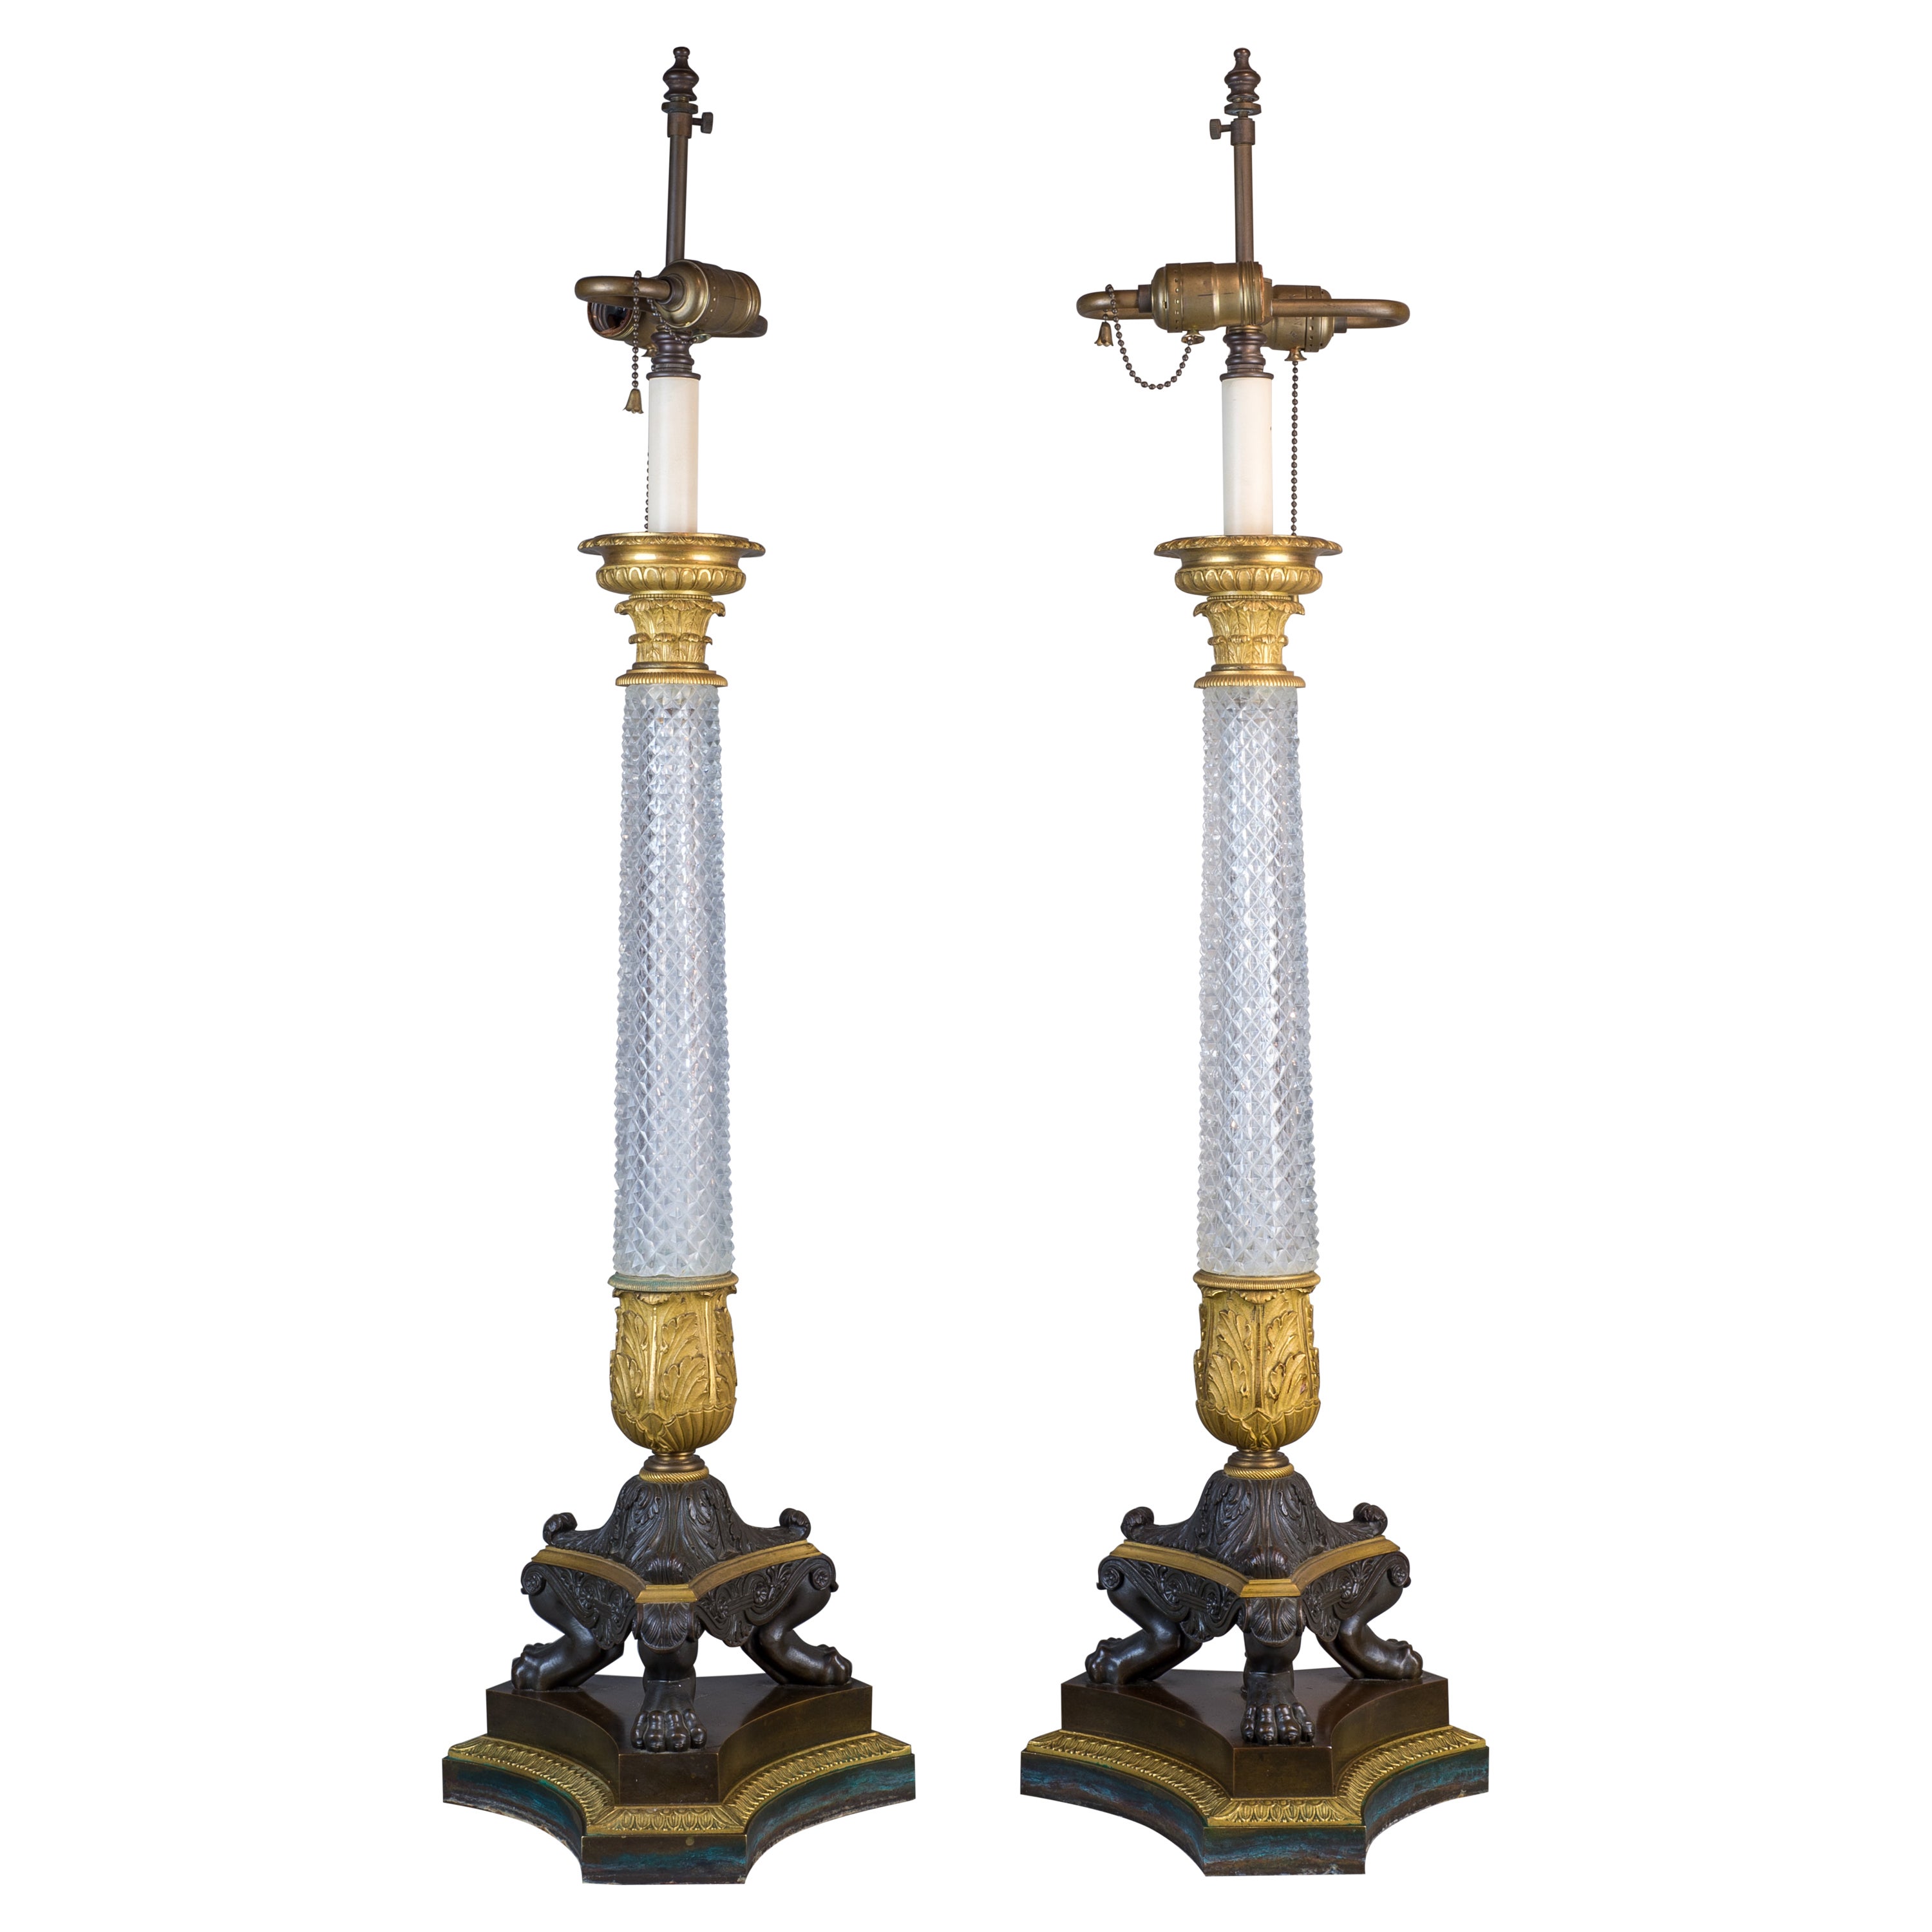 Fine Quality Pair of Early Empire Ormolu Mounted Cut Crystal Lamps